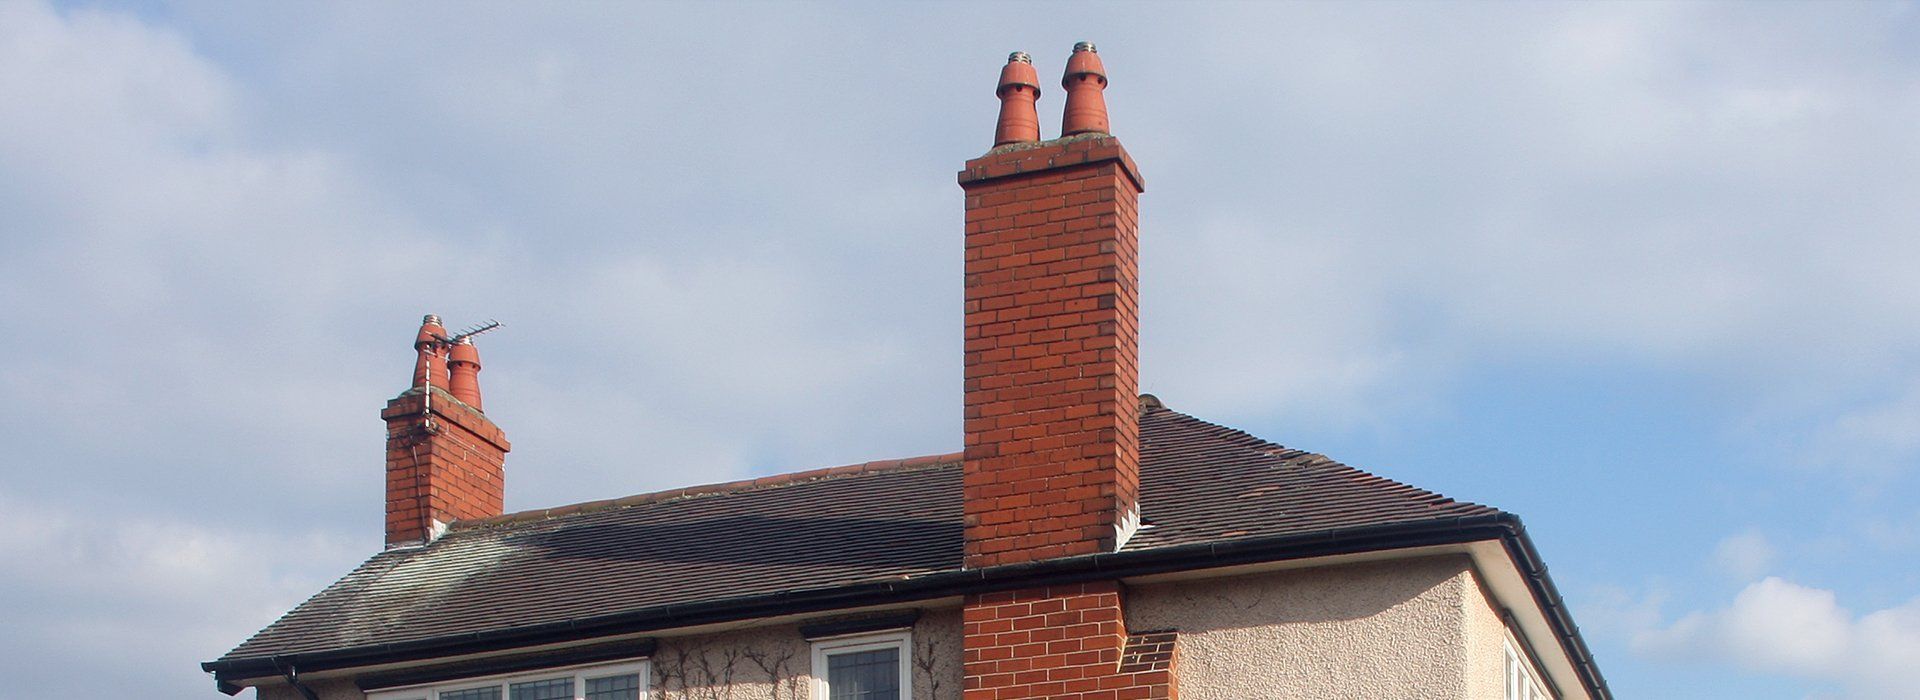 chimneys built on the roofing